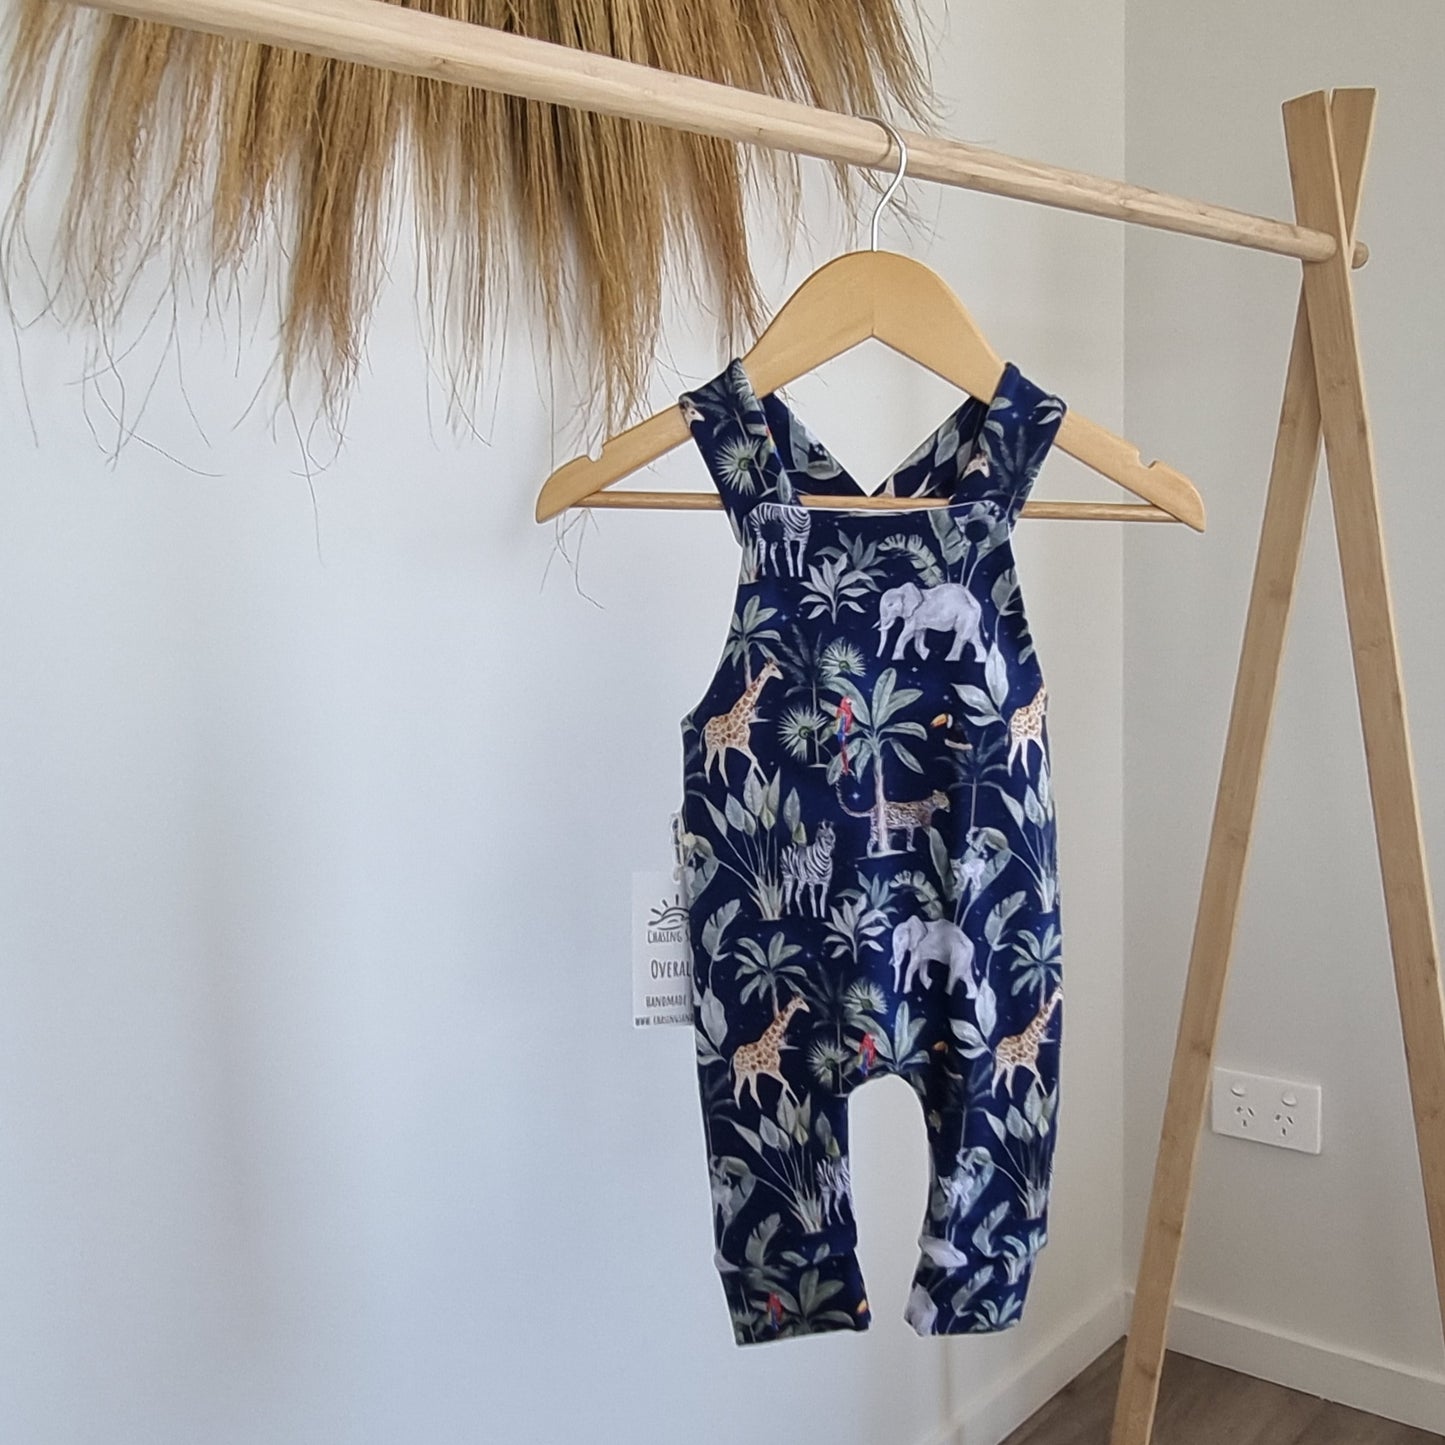 Long Overalls - Night Safari hanging on wooden rack. African animal and plant illustrations against navy blue background.